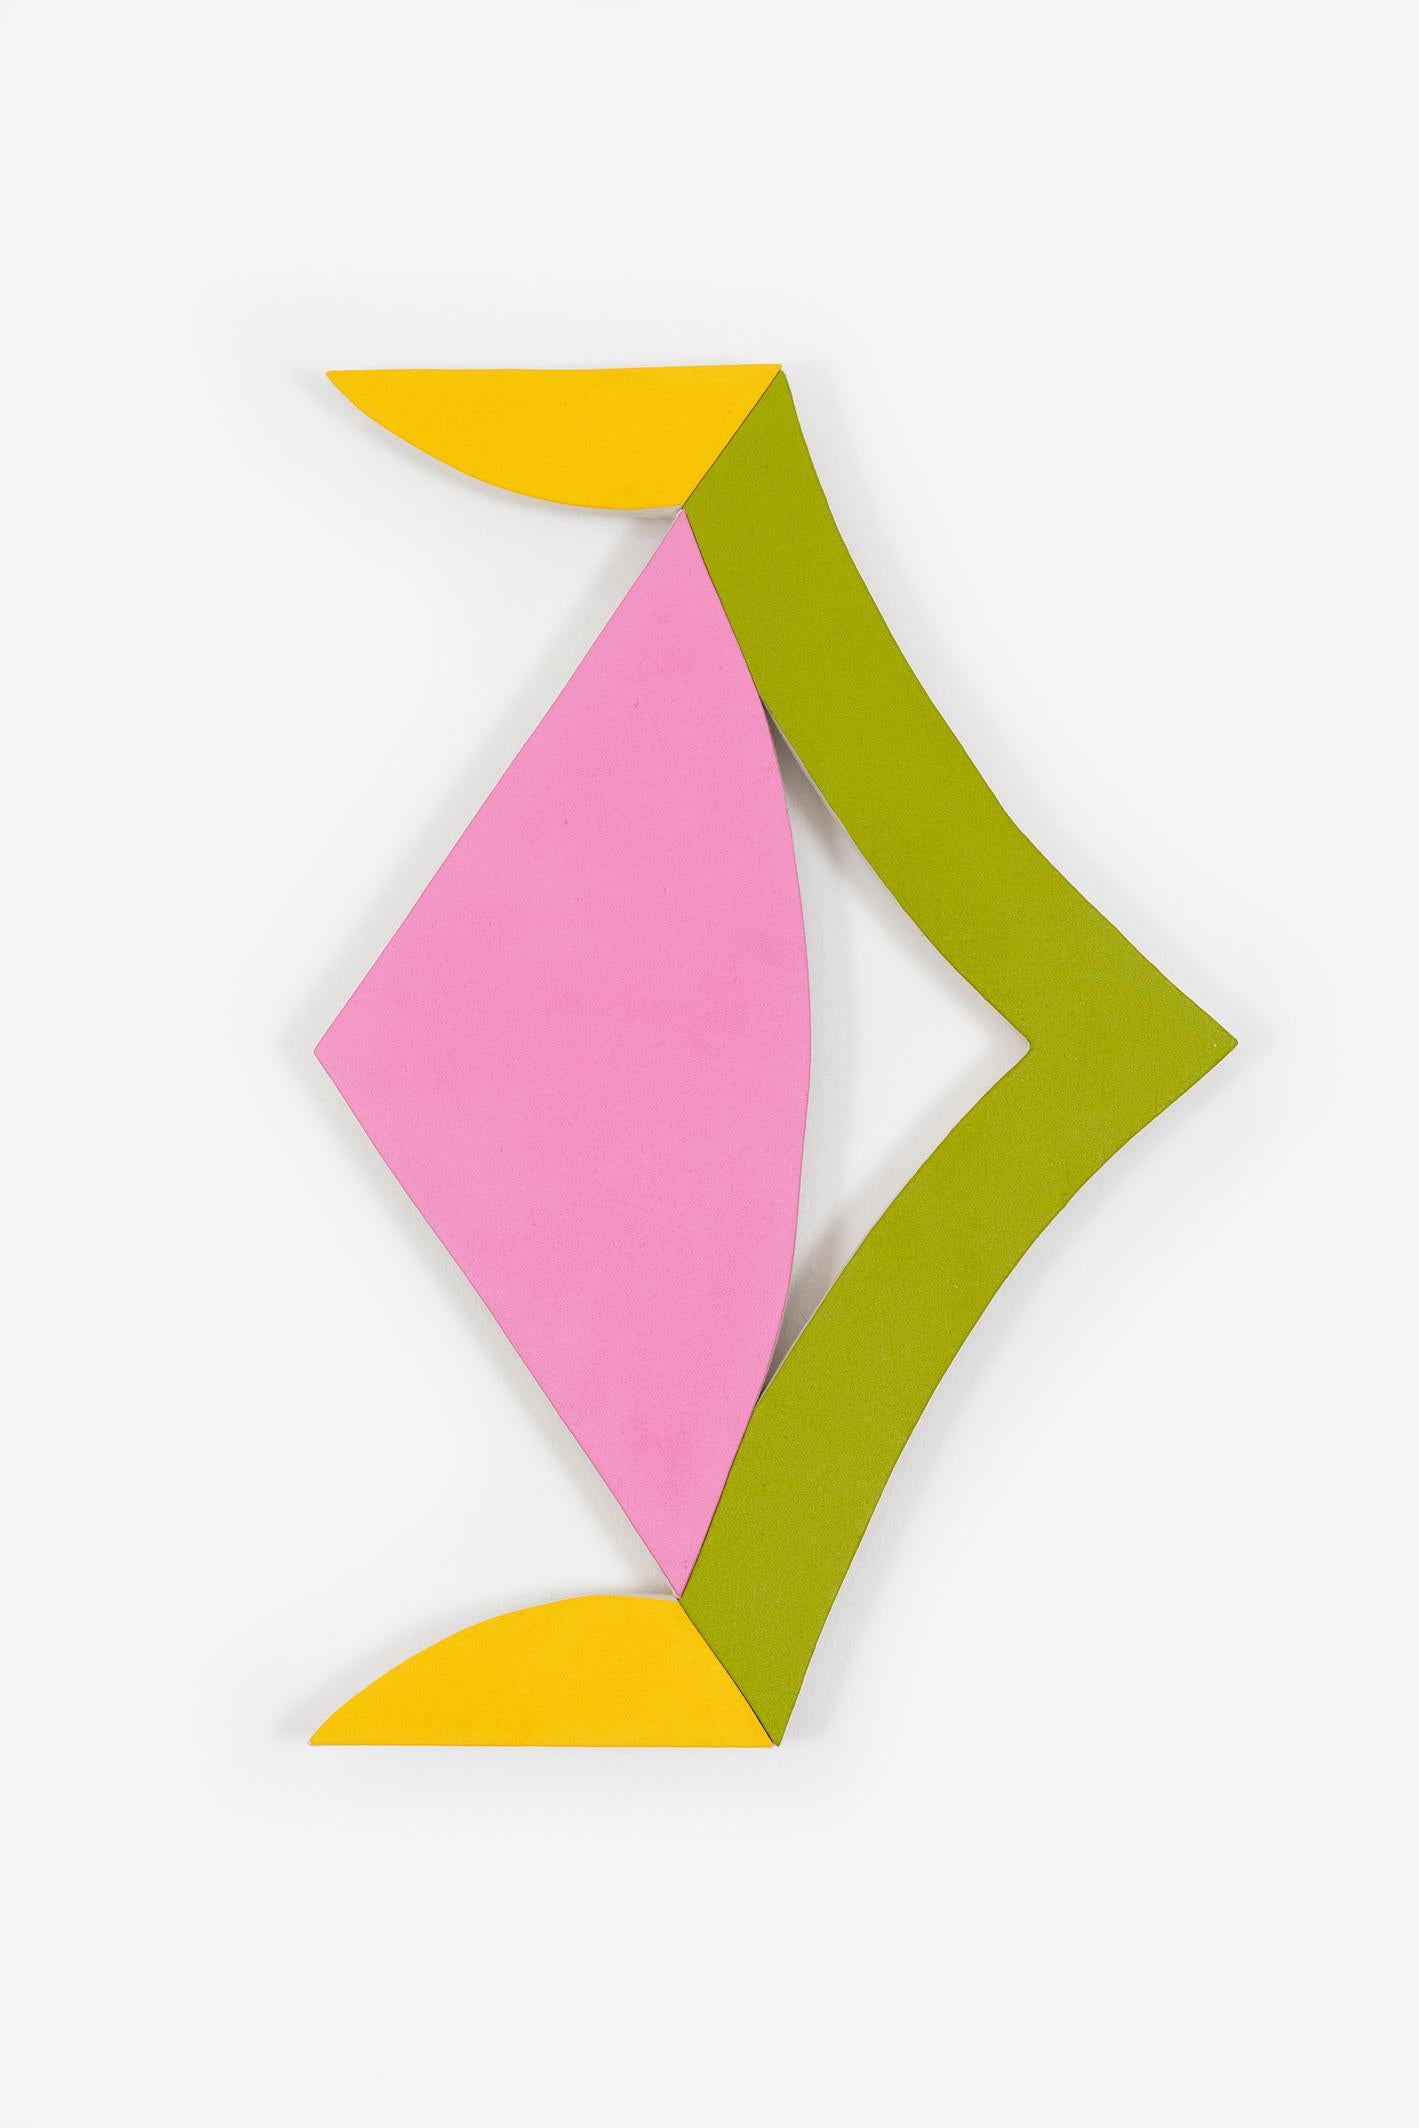 Jason Matherly Abstract Sculpture - "21-5" Wall Sculpture-yellow, pink, green, geometric, mid century, mcm, small